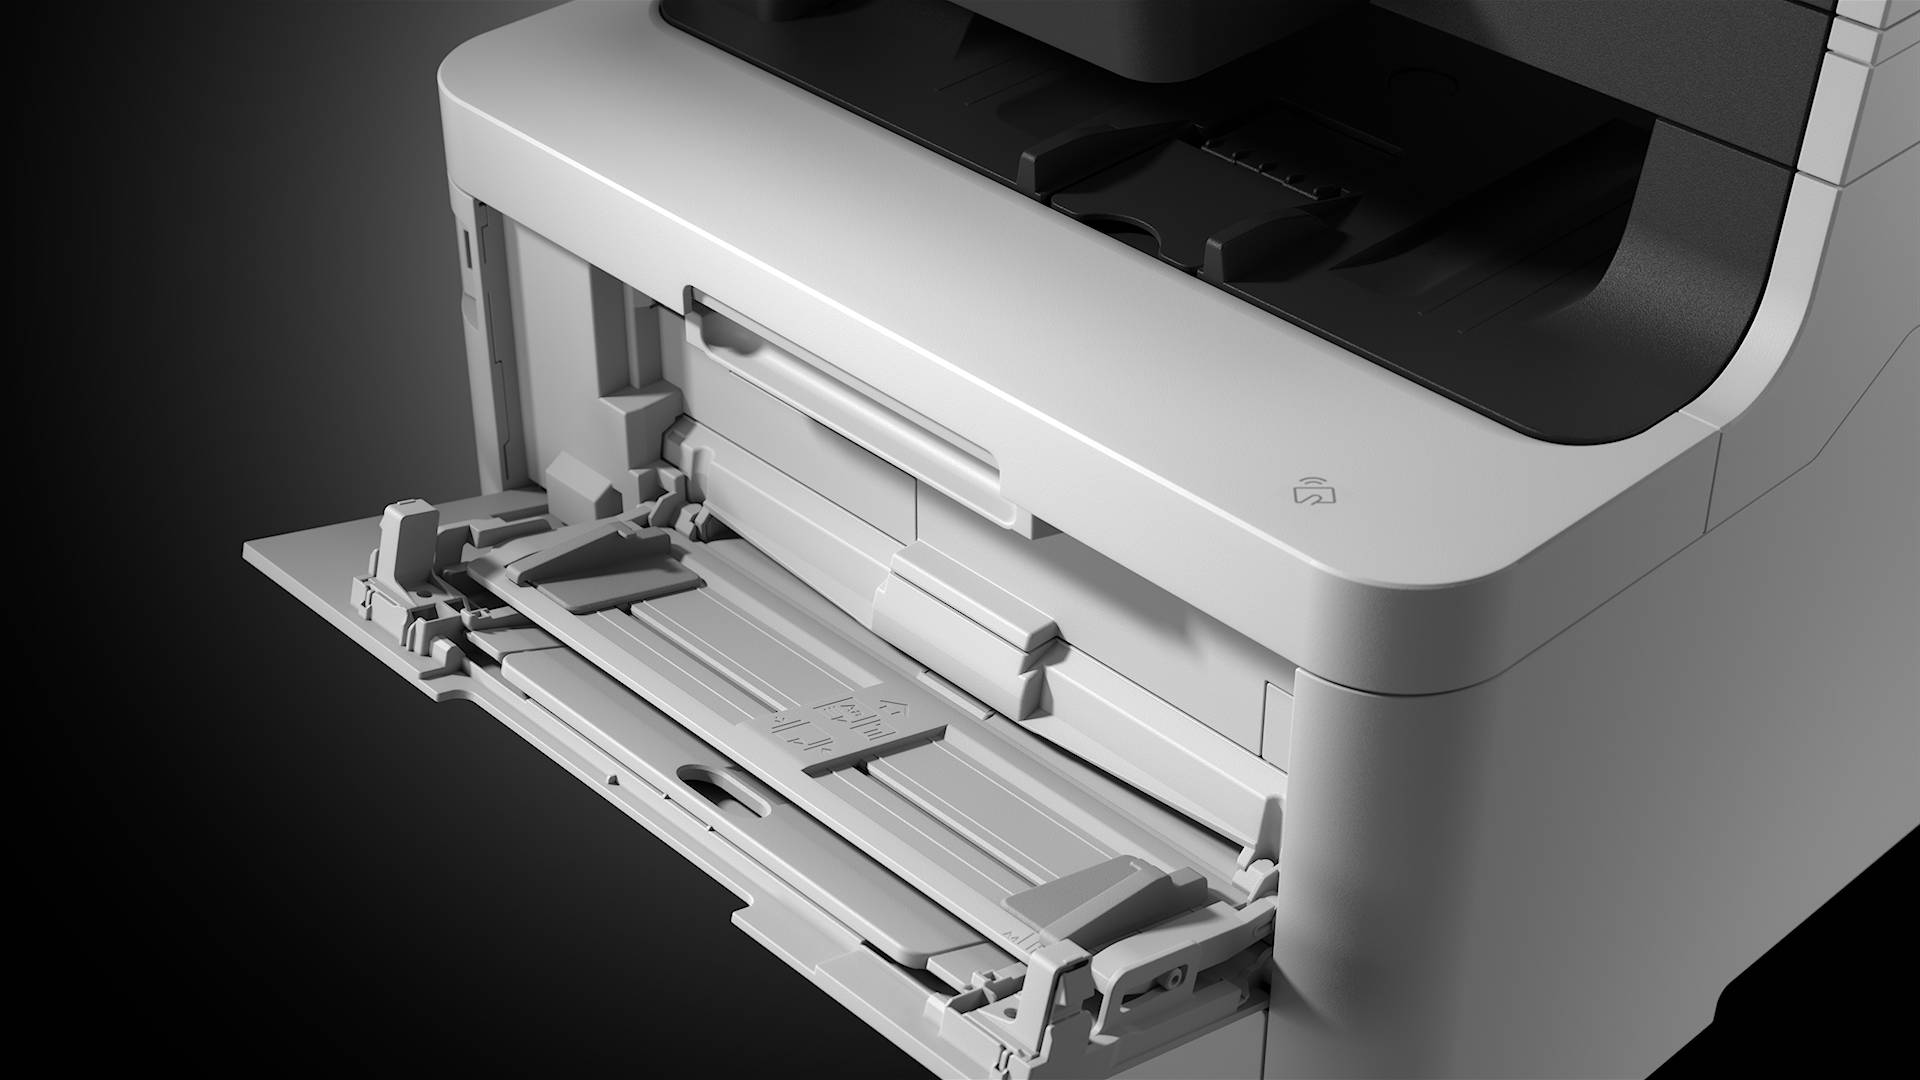 Brother printer product image of the multi-purpose tray.